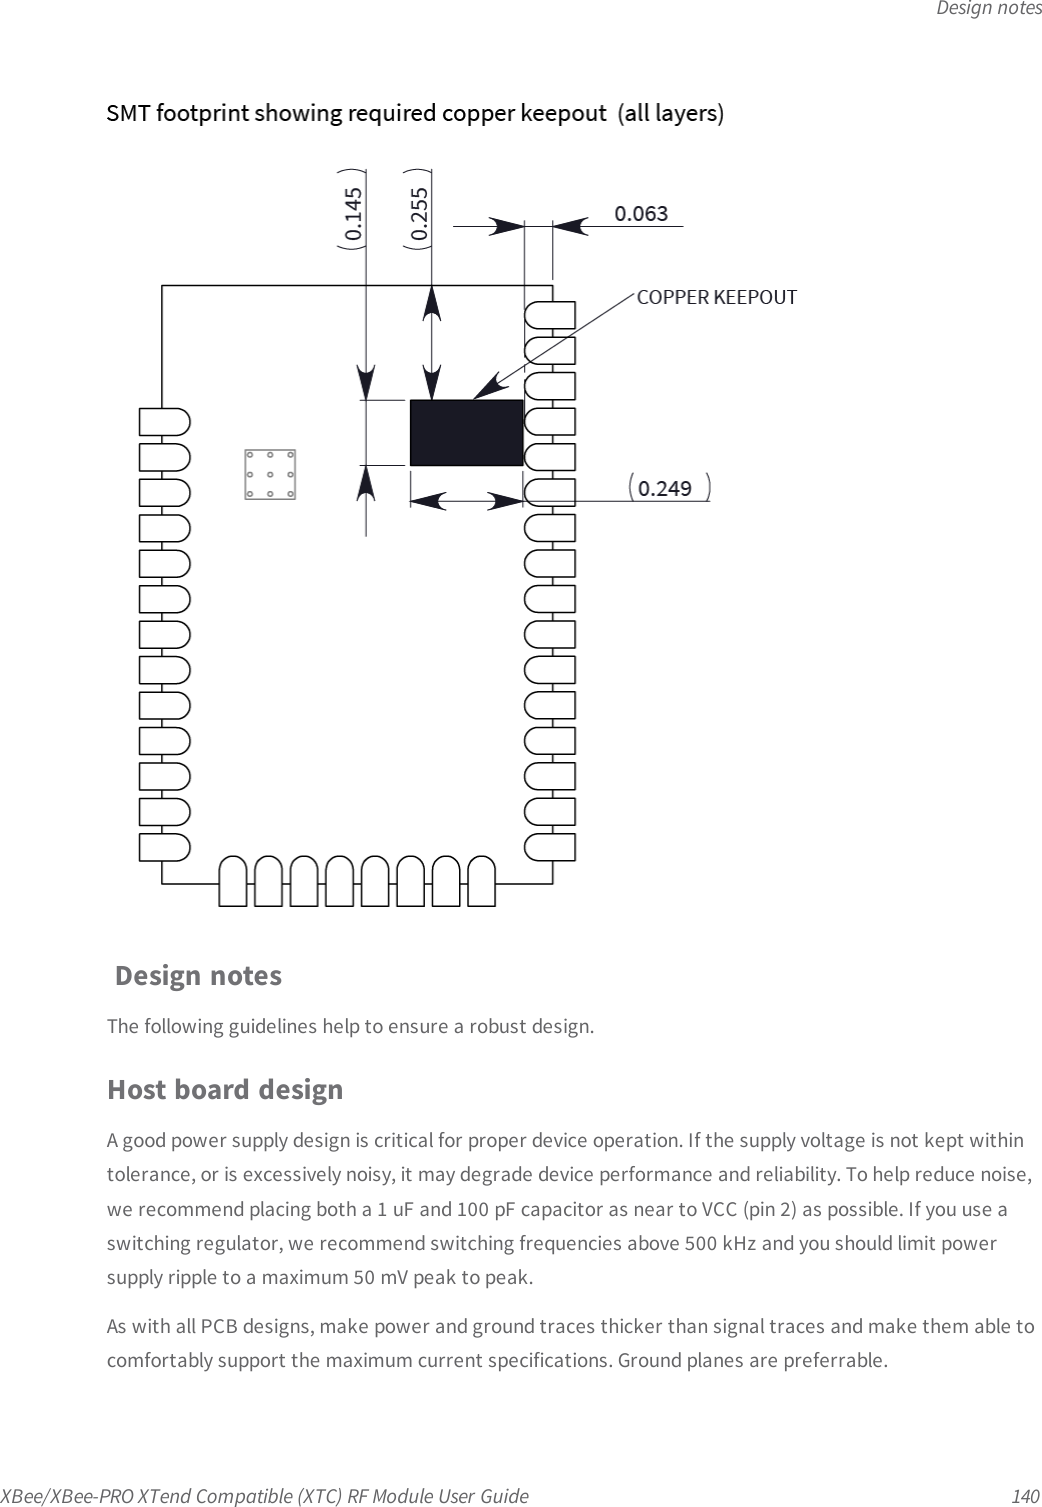 Design notesXBee/XBee-PRO XTend Compatible (XTC) RF Module User Guide 140Design notesThe following guidelines help to ensure a robust design.Host board designA good power supply design is critical for proper device operation. If the supply voltage is not kept withintolerance, or is excessively noisy, it may degrade device performance and reliability. To help reduce noise,we recommend placing both a 1 uF and 100 pF capacitor as near to VCC (pin 2) as possible. If you use aswitching regulator, we recommend switching frequencies above 500 kHz and you should limit powersupply ripple to a maximum 50 mV peak to peak.As with all PCB designs, make power and ground traces thicker than signal traces and make them able tocomfortably support the maximum current specifications. Ground planes are preferrable.